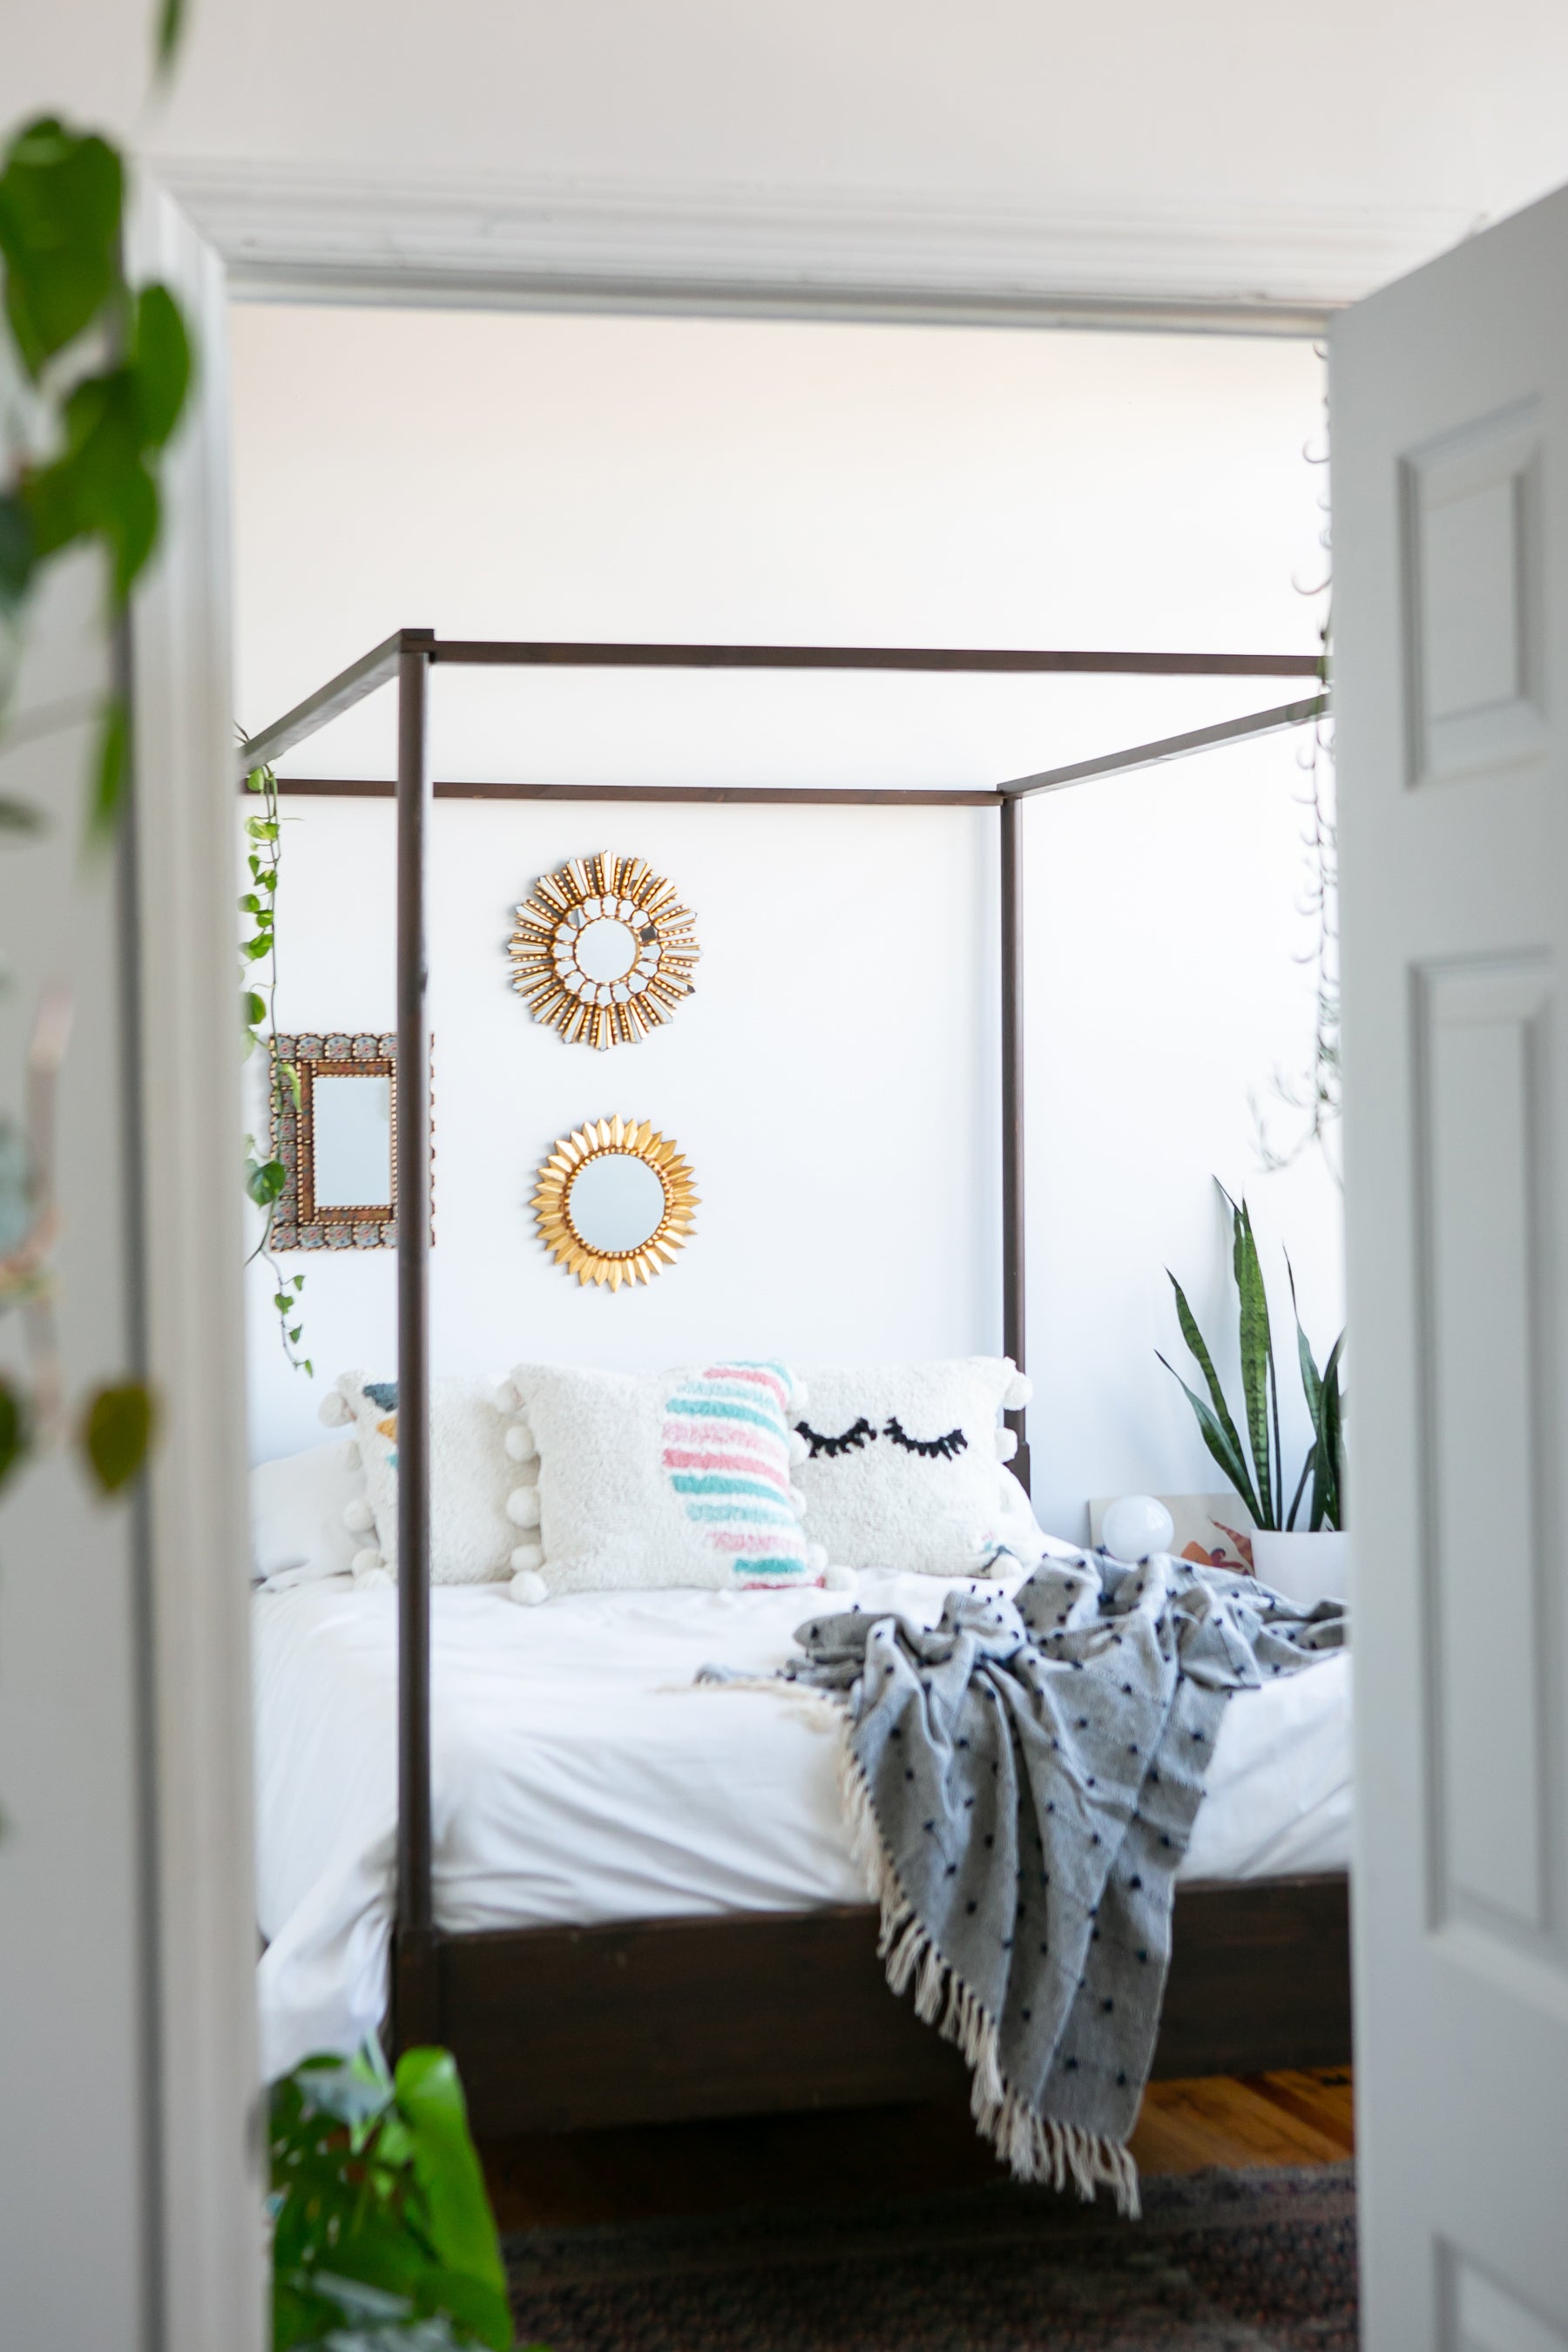 5 Easy Ways of Updating Your Bedroom (Without Breaking the Bank) - Sigrid & Co.